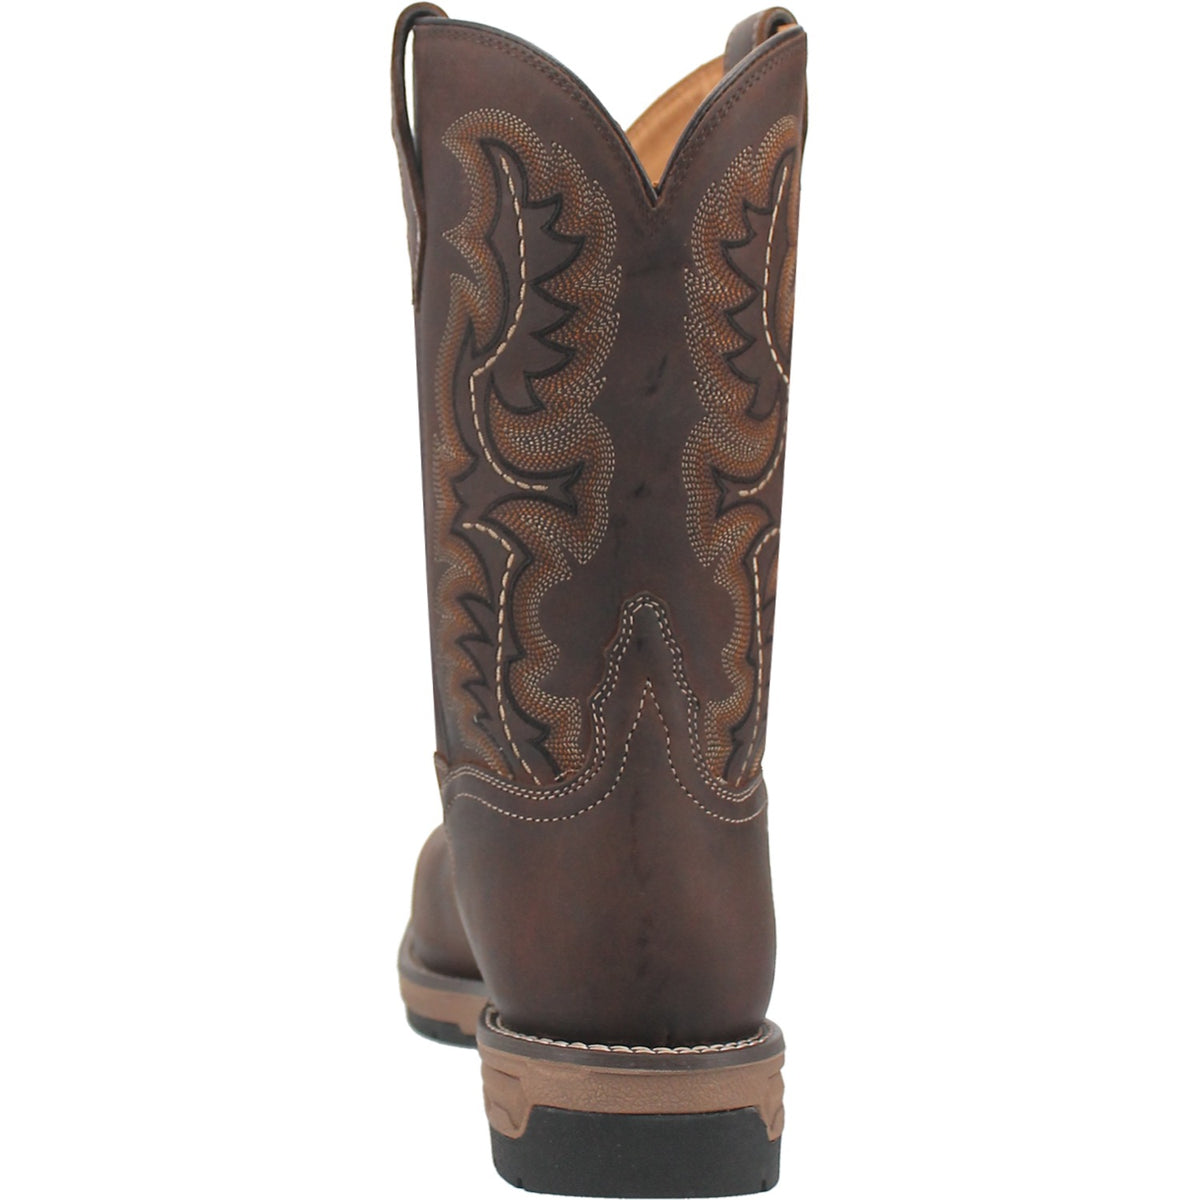 STRINGFELLOW STEEL TOE LEATHER BOOT Cover